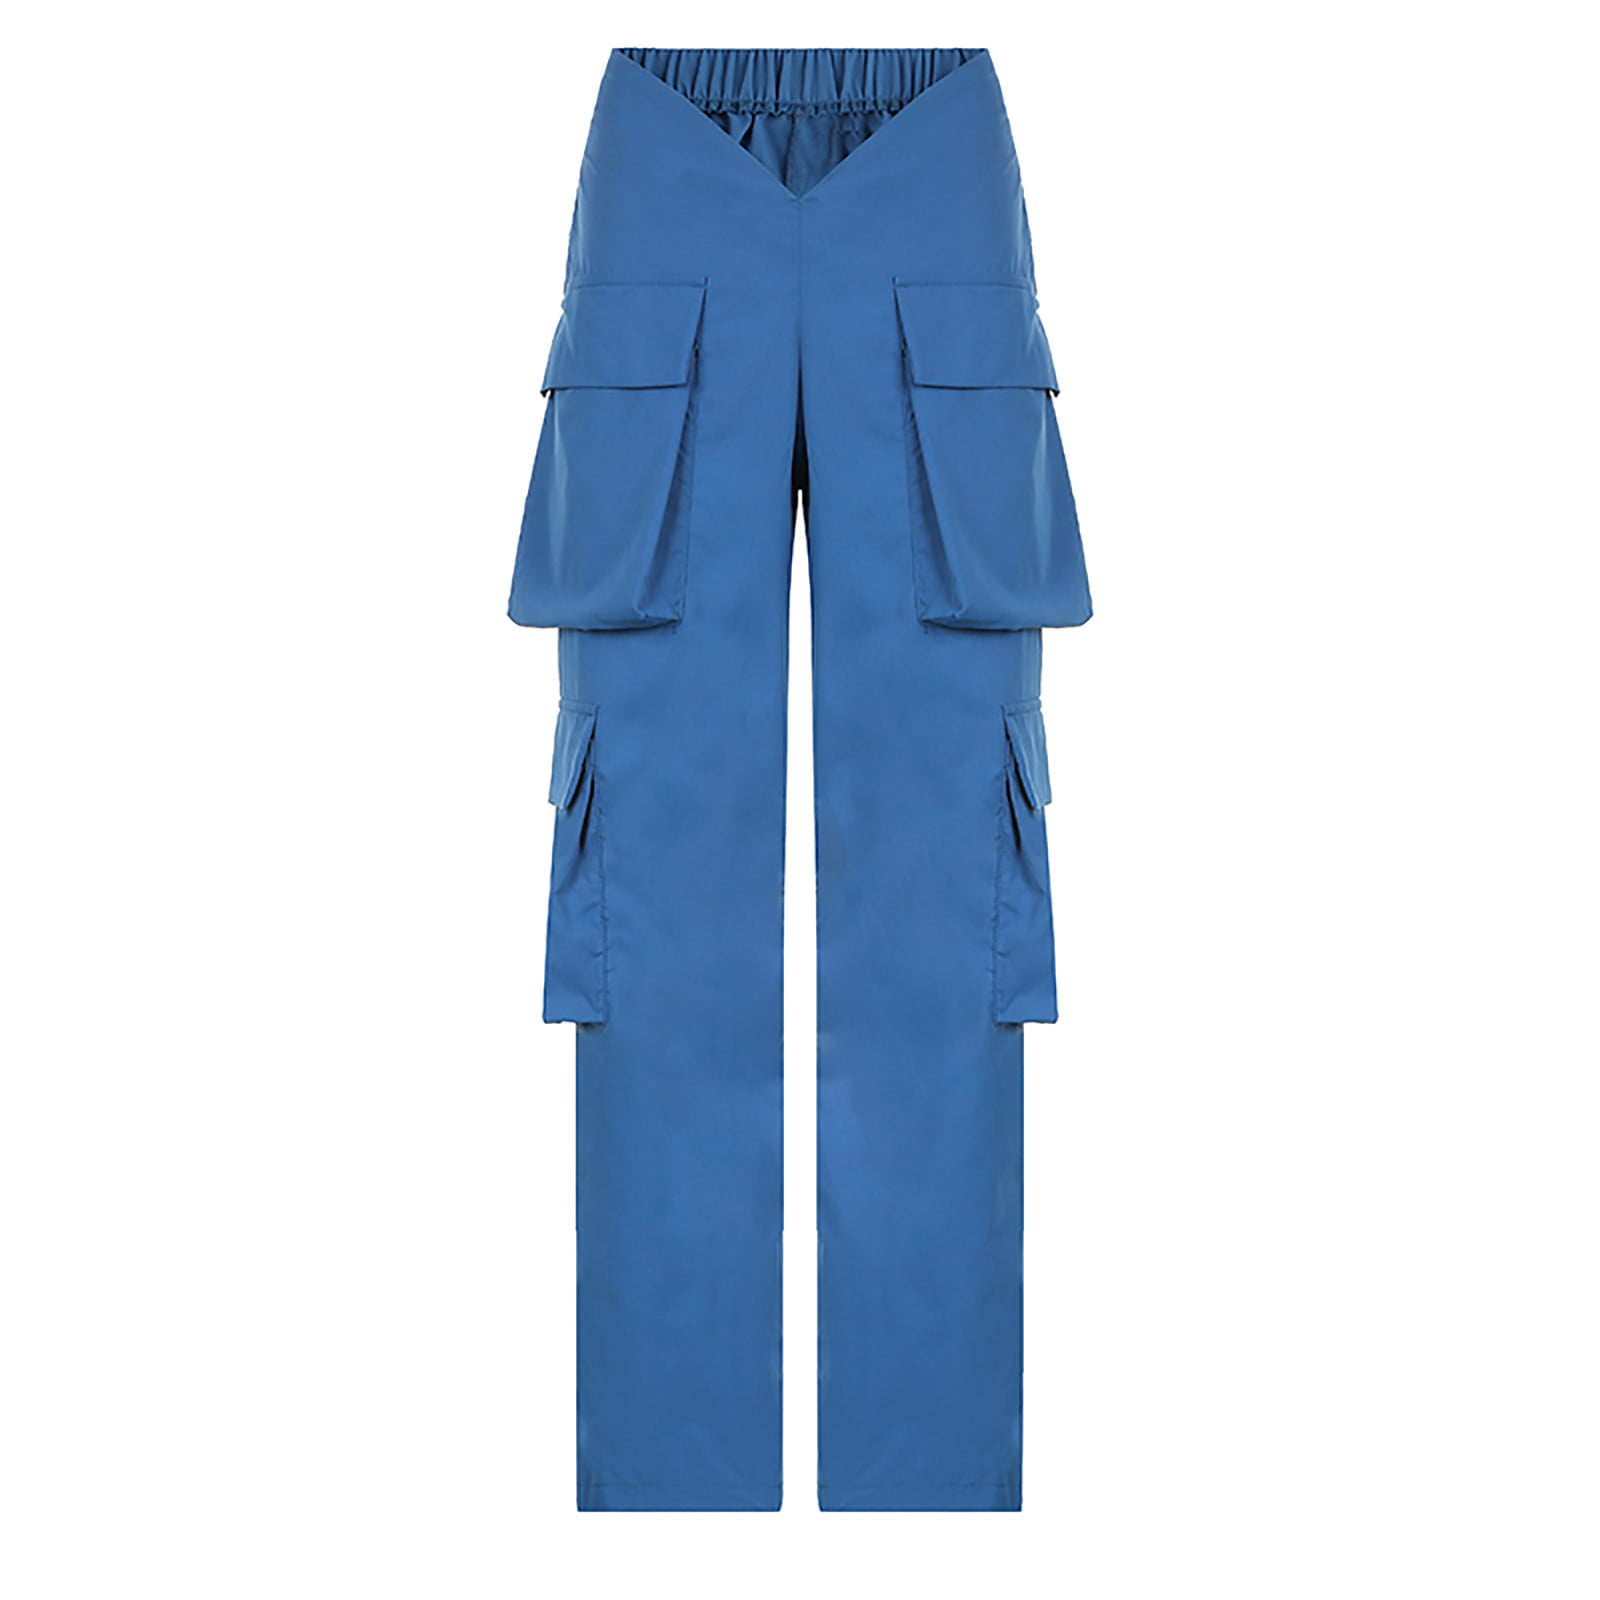 YYDGH Cargo Pants Women Baggy Streetwear V-Shaped High Waisted Casual  Overalls Solid Color Regular and Plus Size Trousers Blue L 